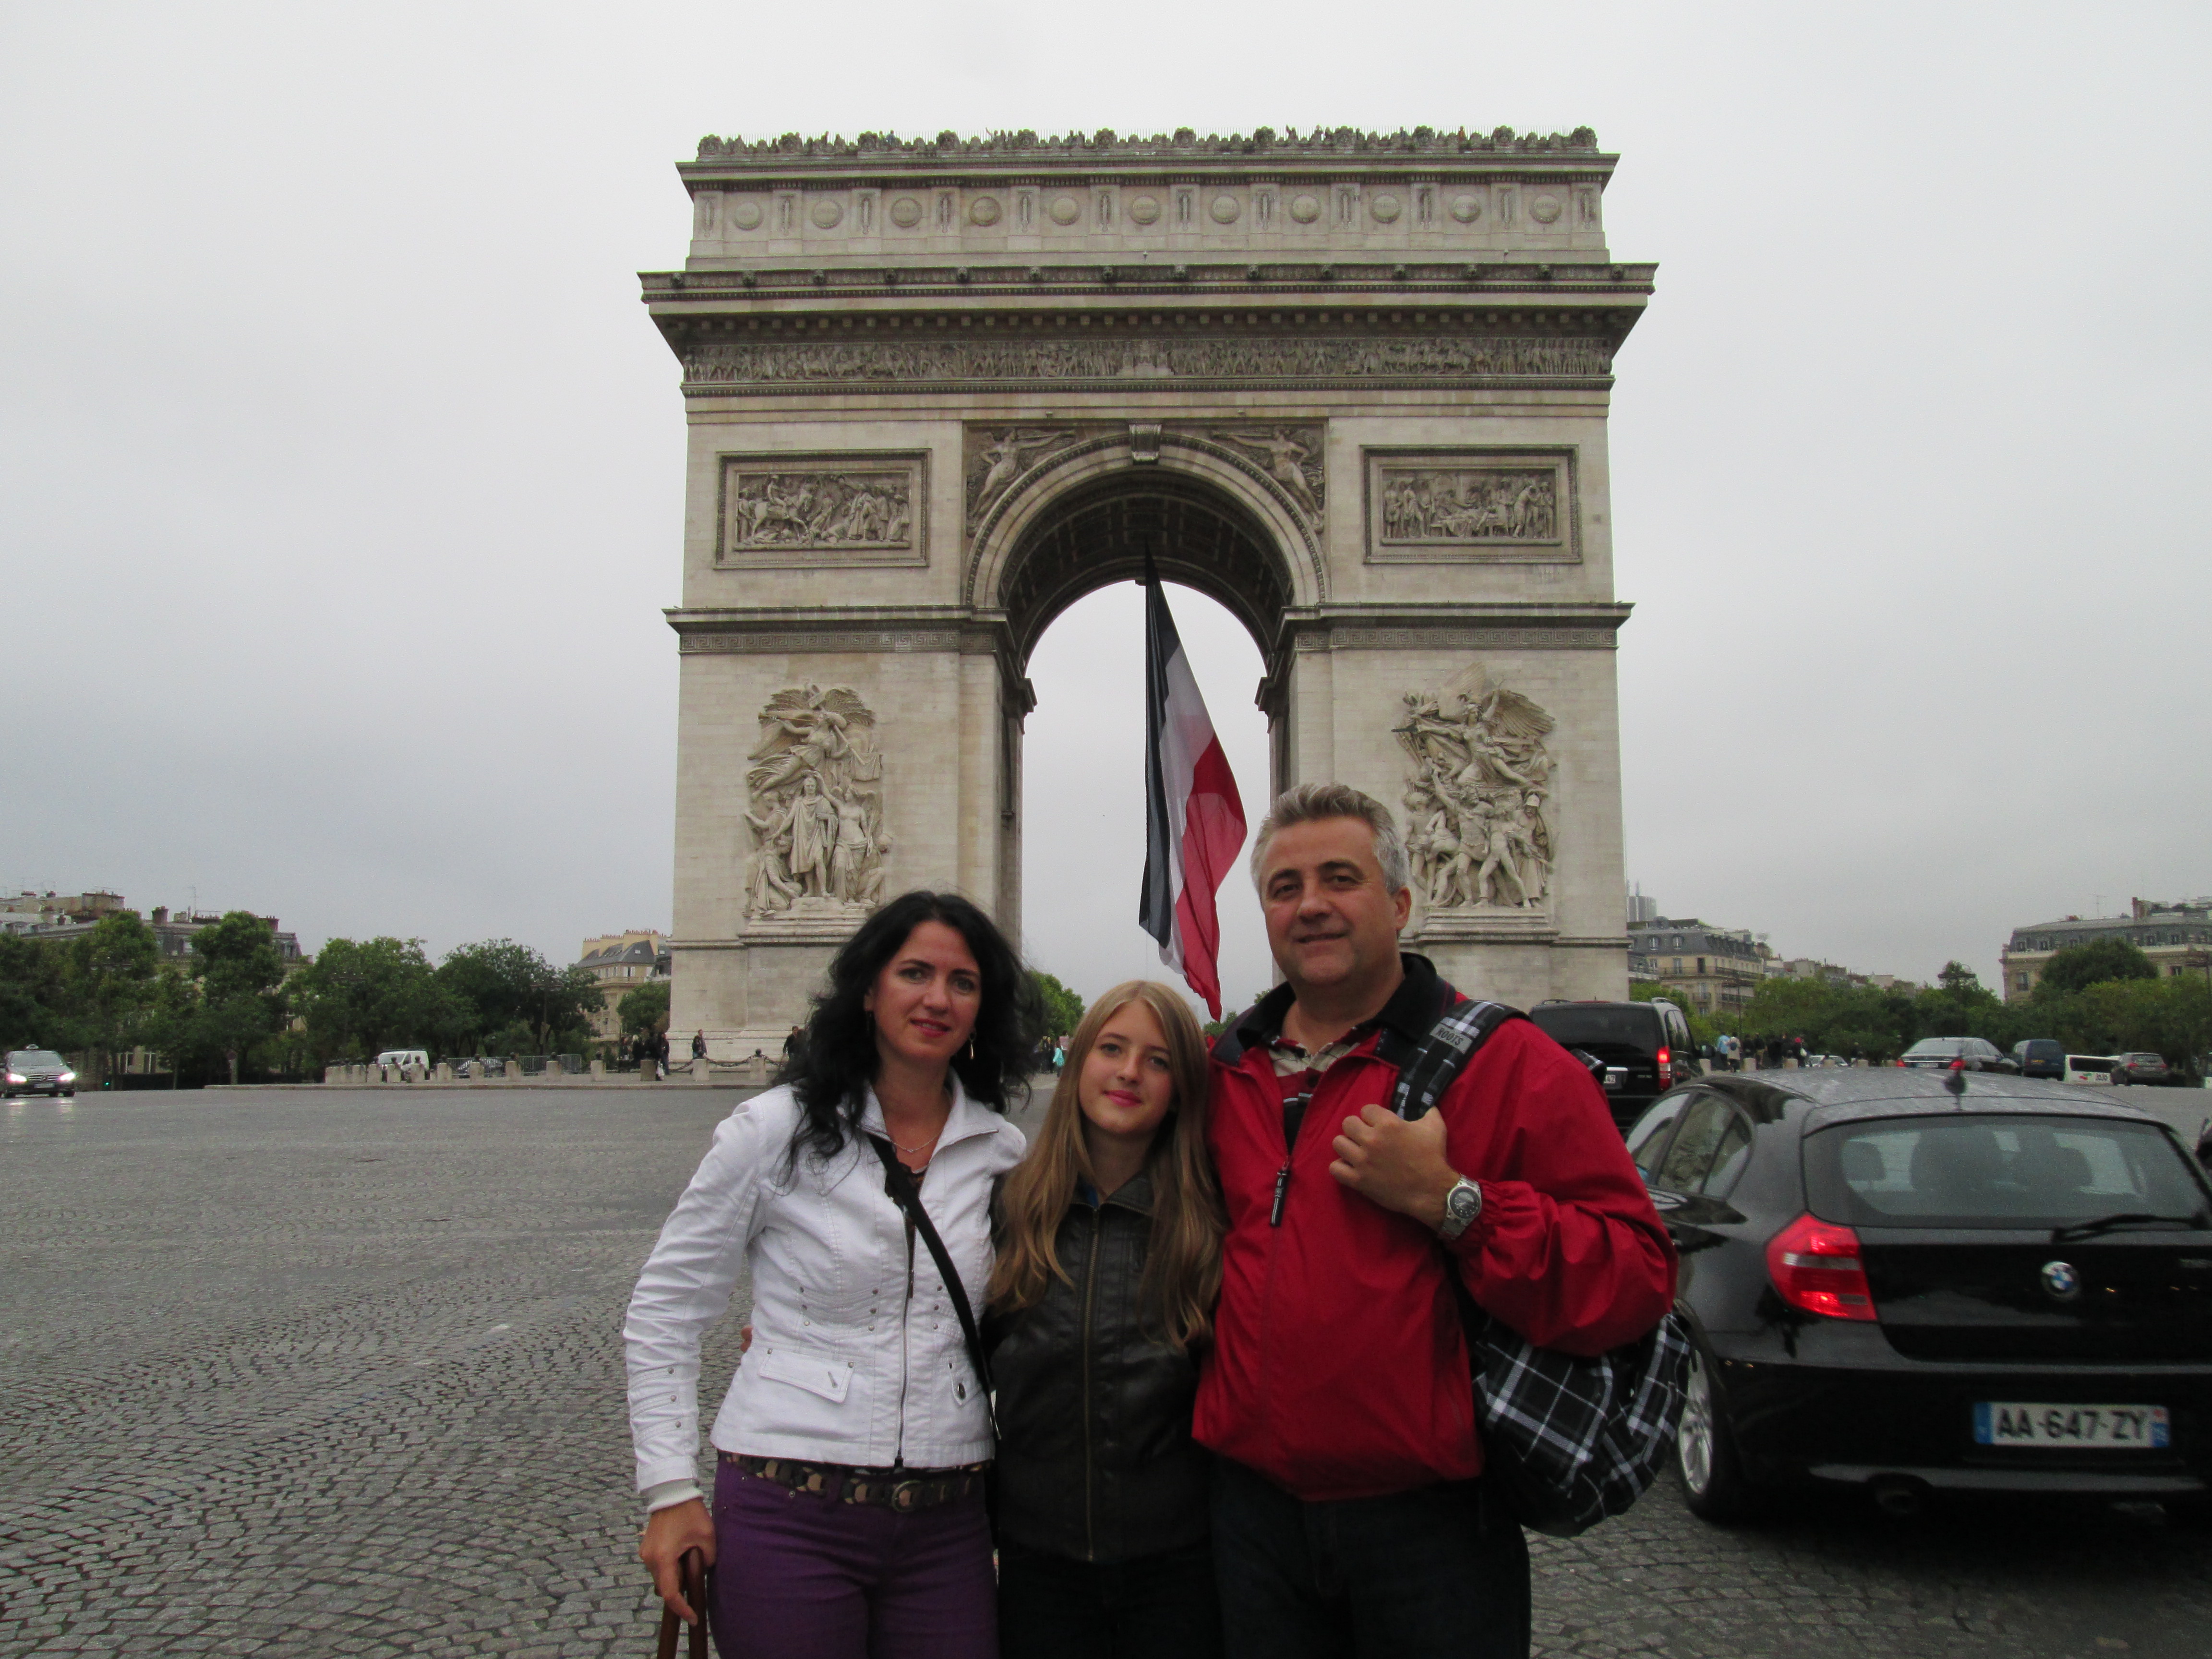 This image is an image of my family in front of The Arc de Triomphe